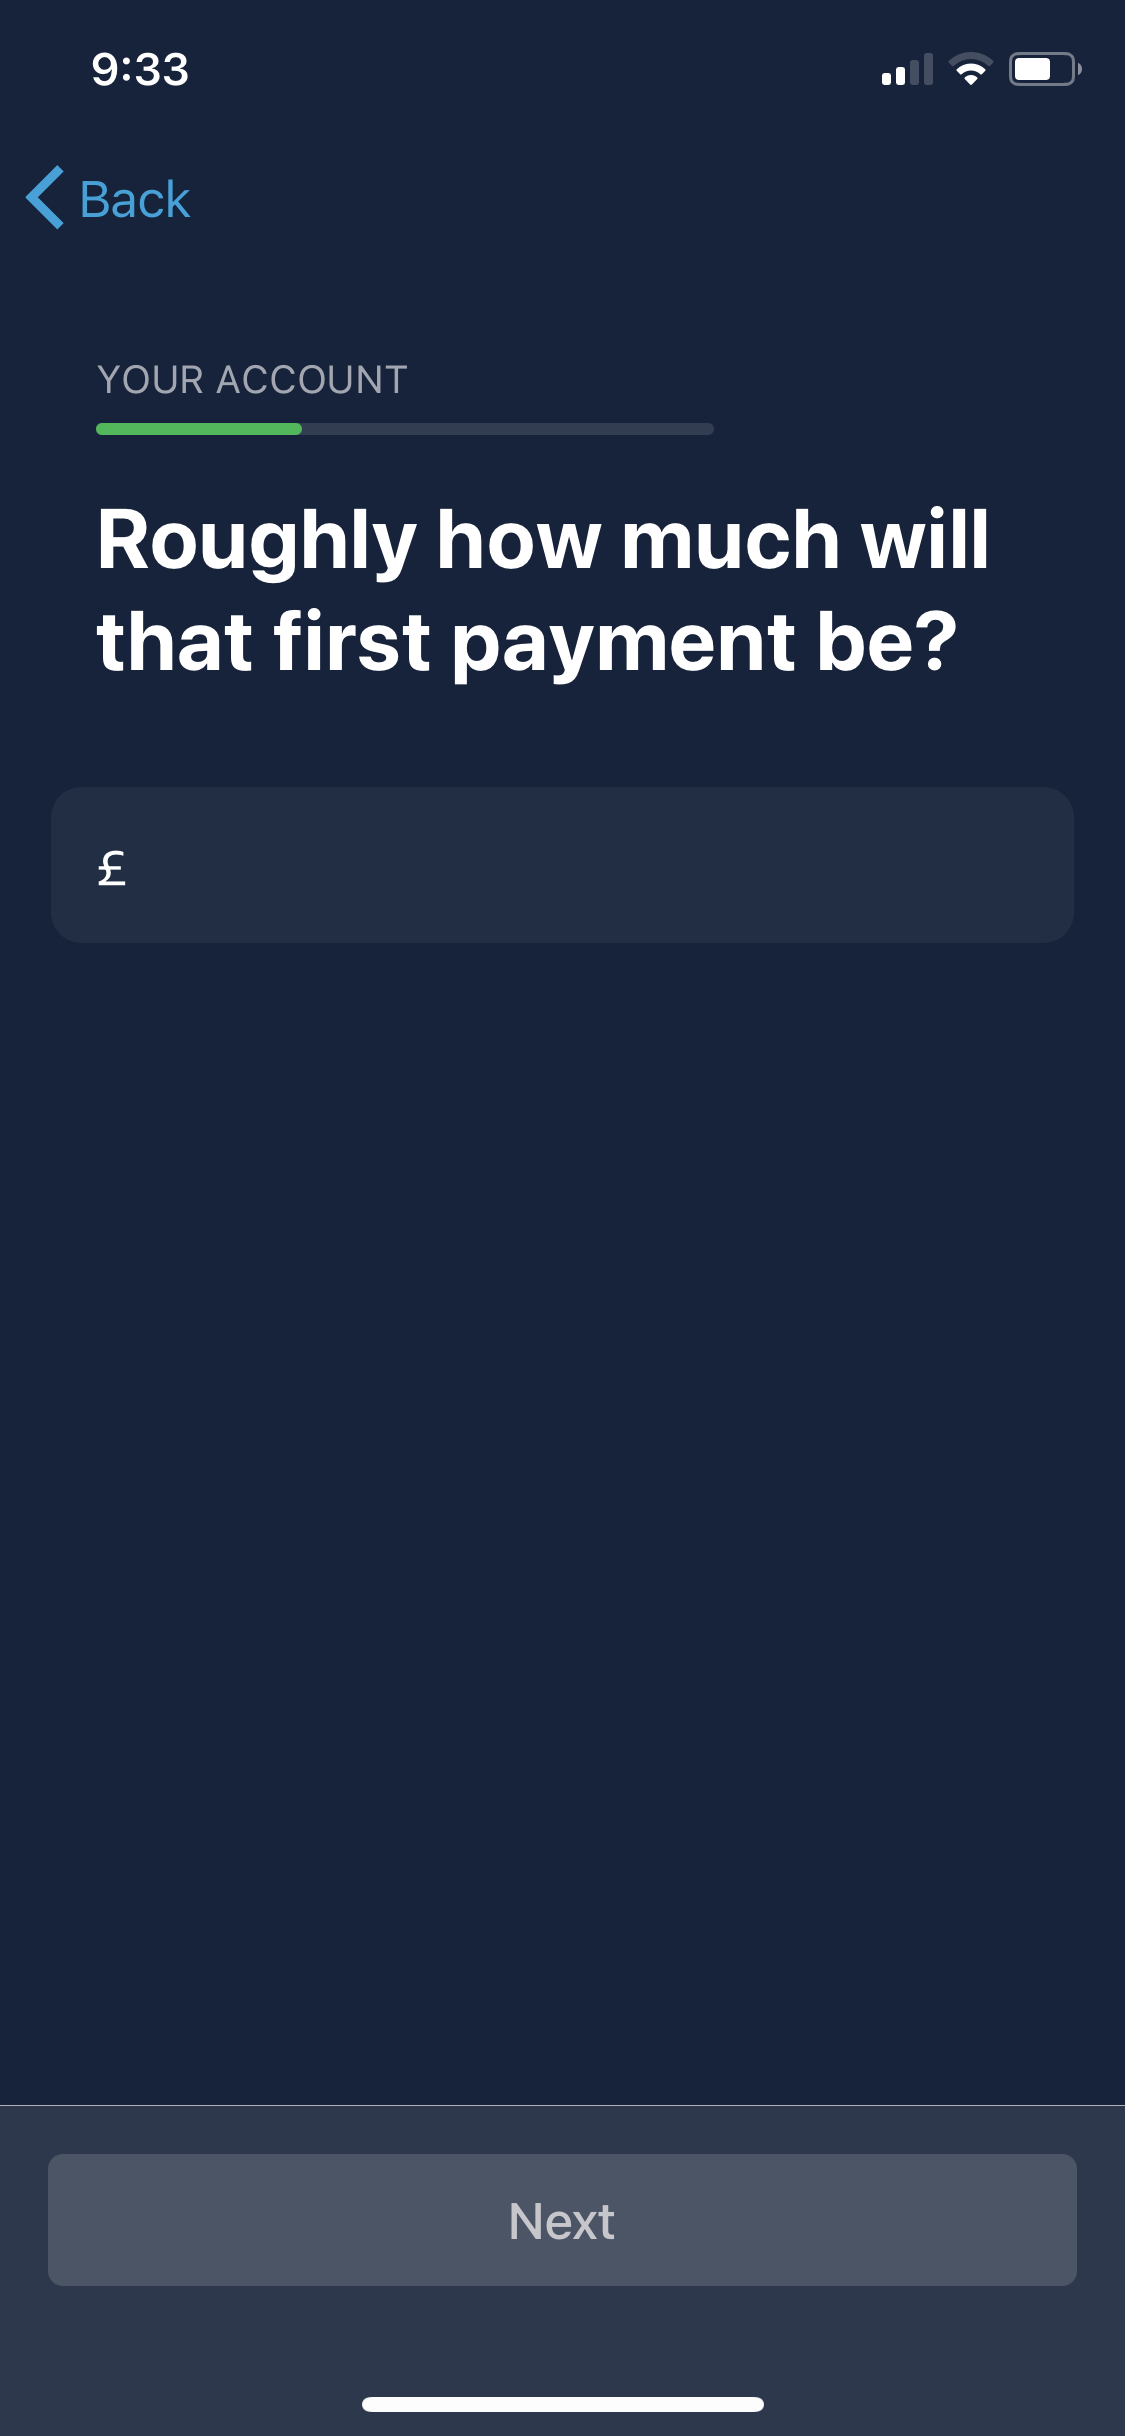 Screenshot of Onboarding question during Onboarding on Monzo user flow